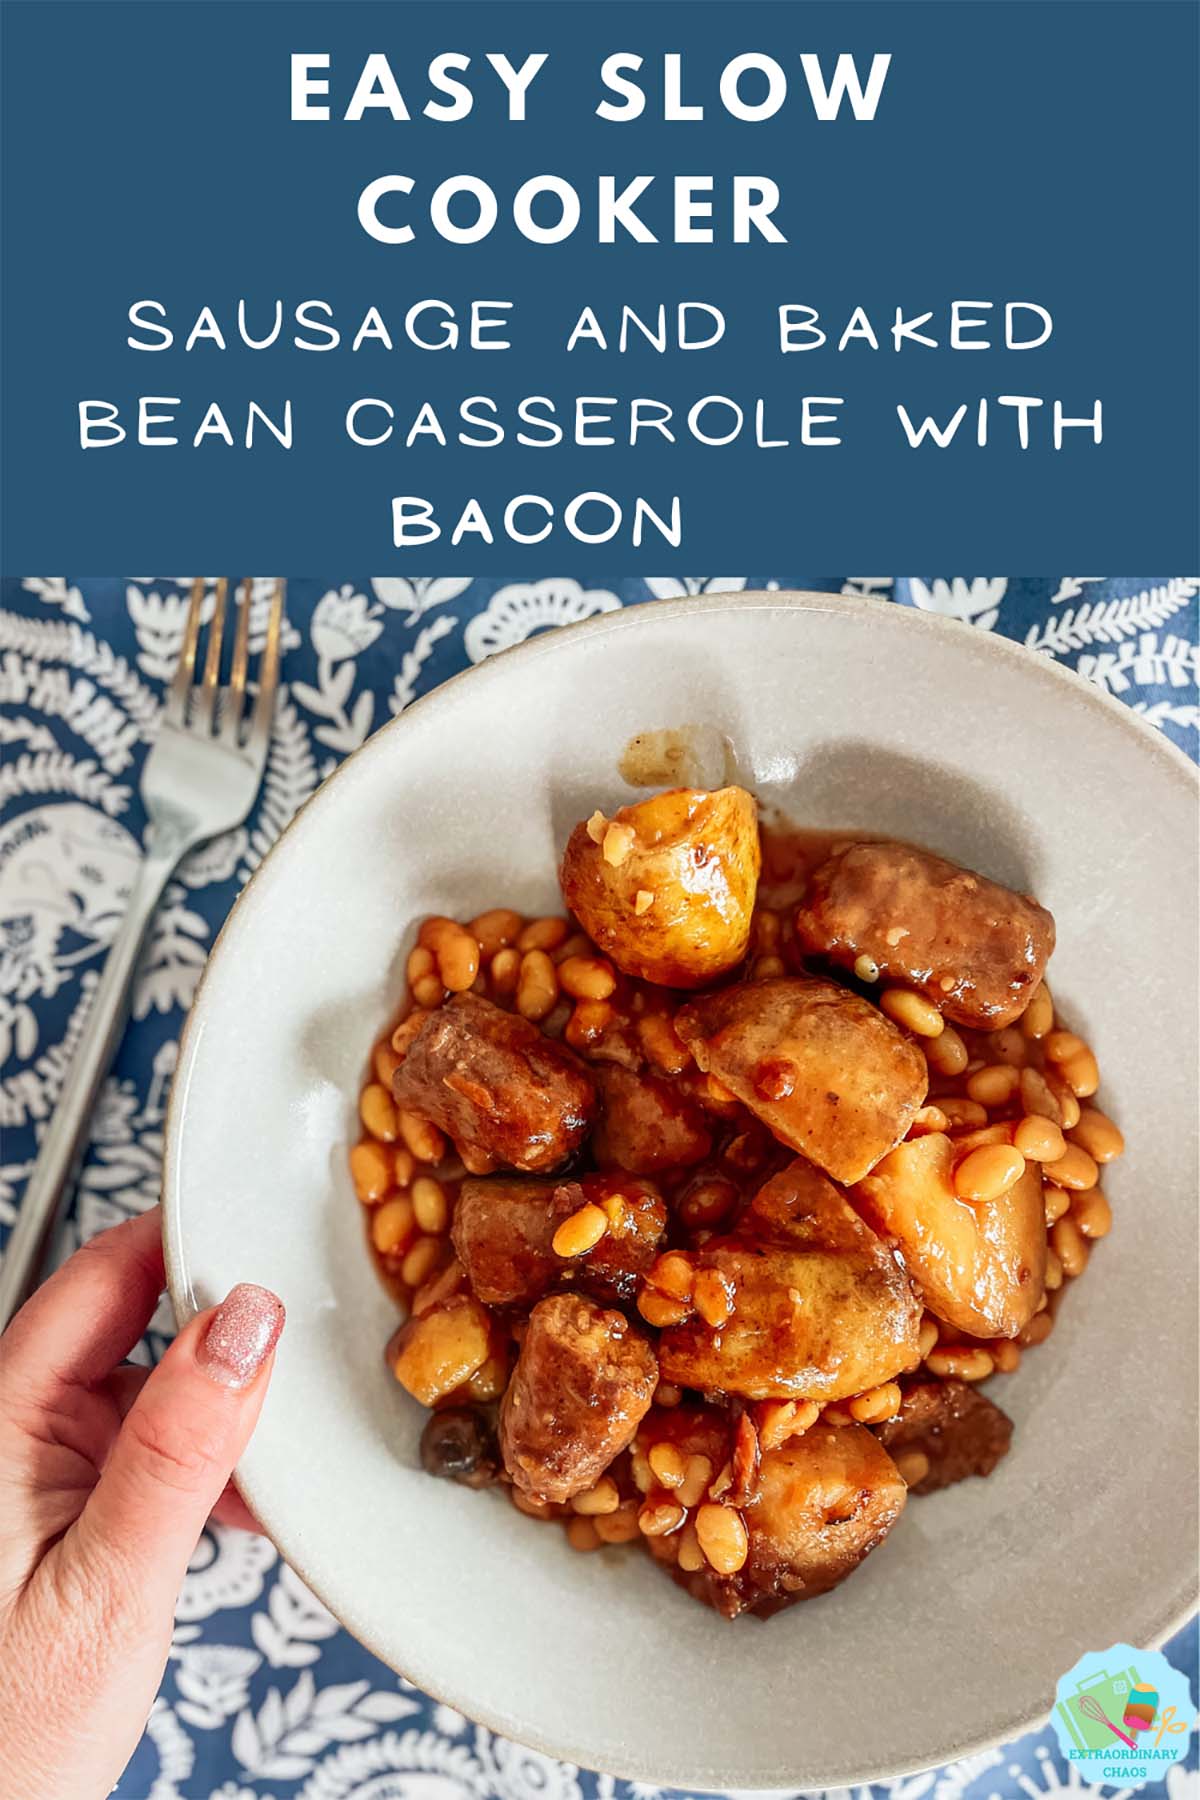 Easy Slow cooker Sausage and baked bean casserole recipe